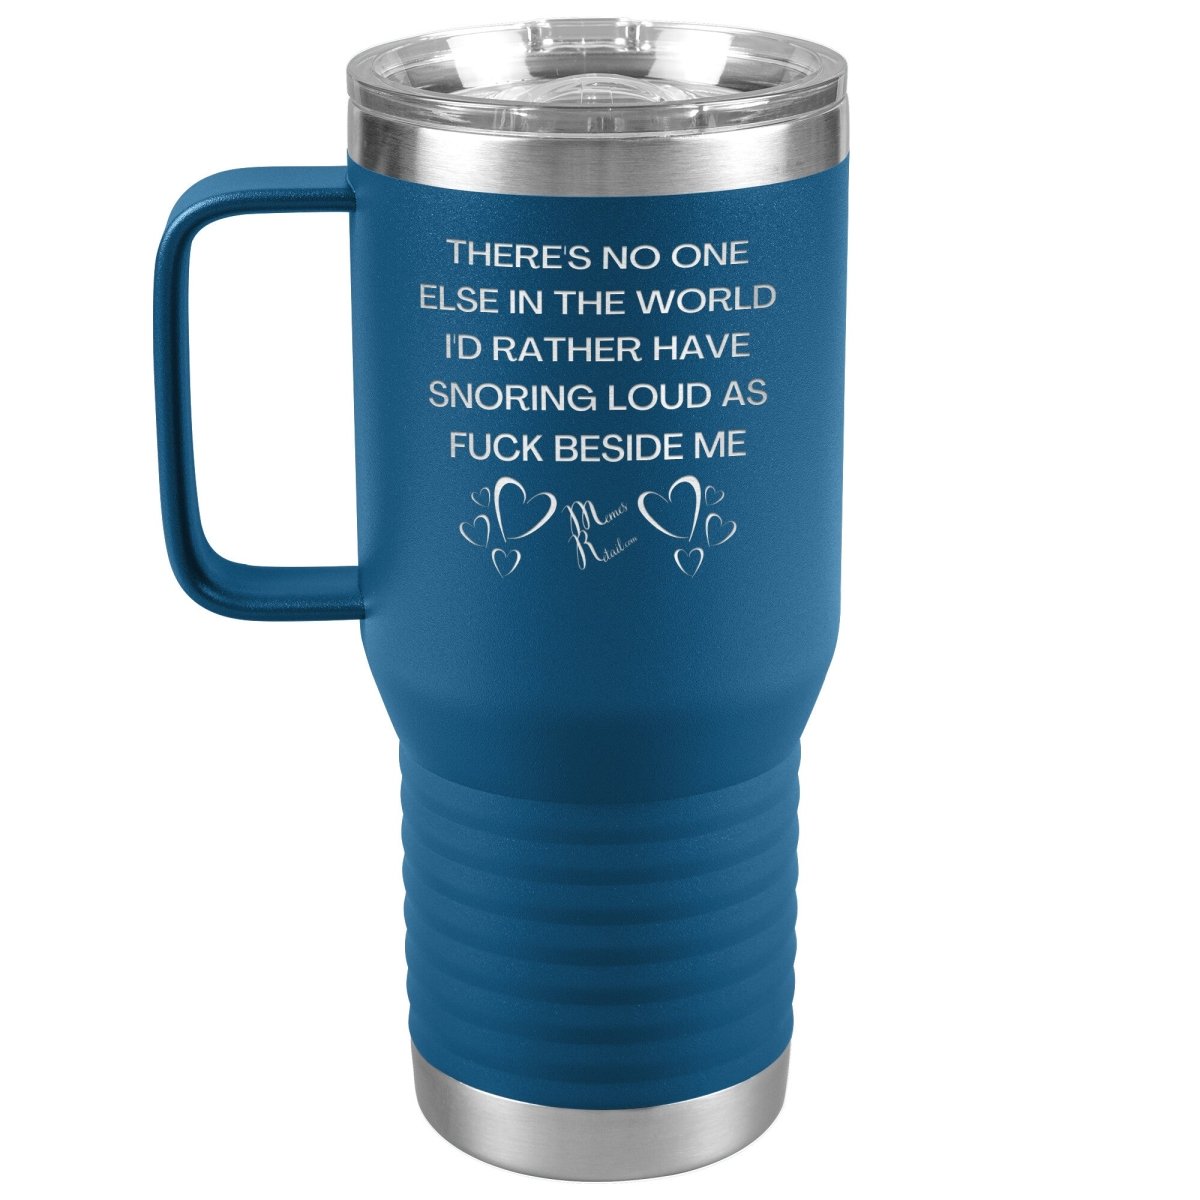 There's No One Else in the World I'd Rather Have Snoring Loud, 20oz Travel Tumbler / Blue - MemesRetail.com